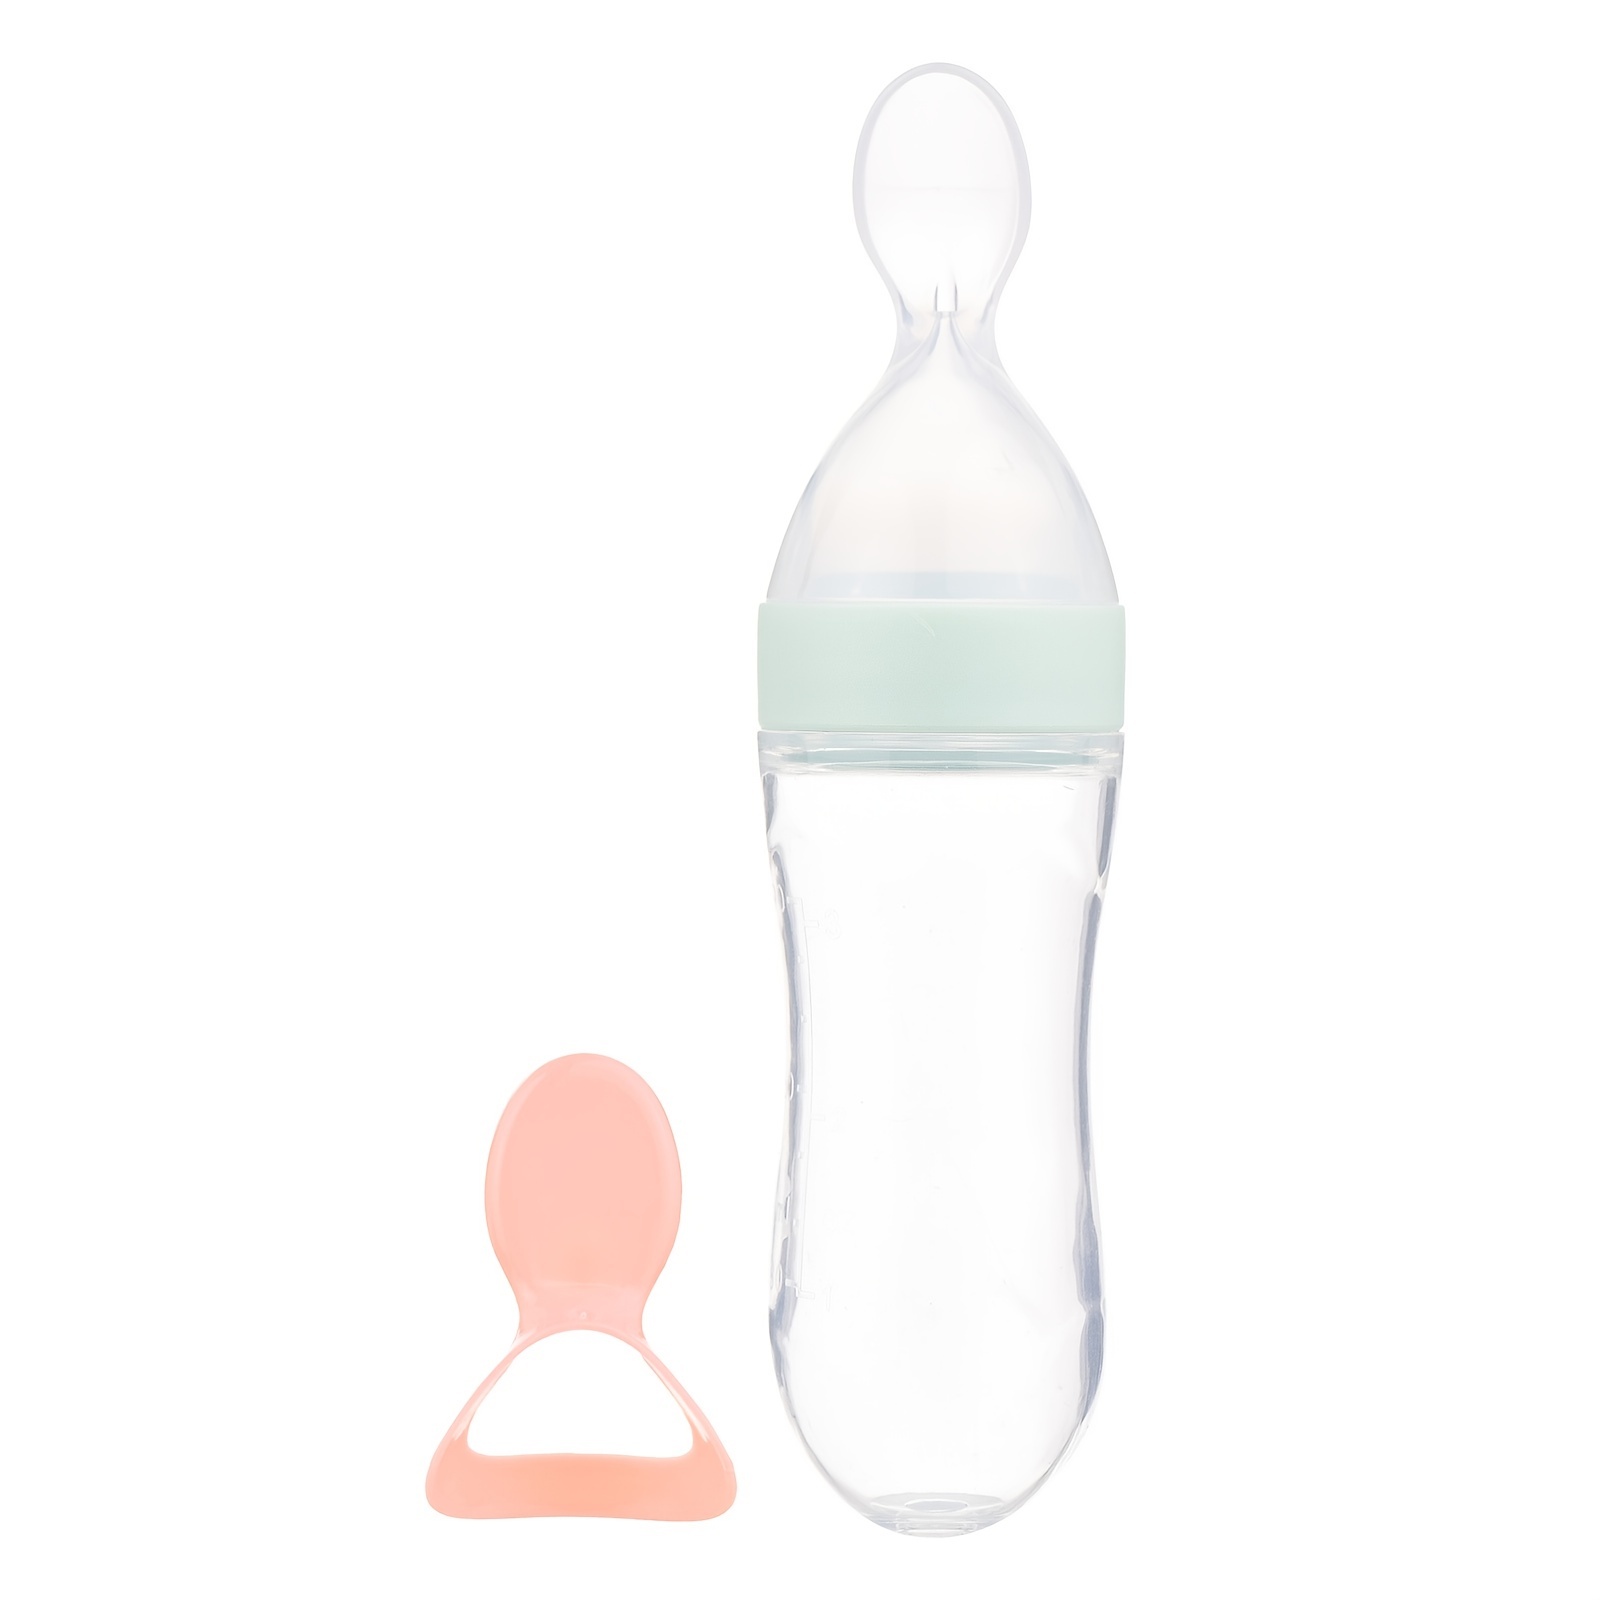 Baby Food Feeder, Silicone Squeeze Spoon Feeder for Infant Food